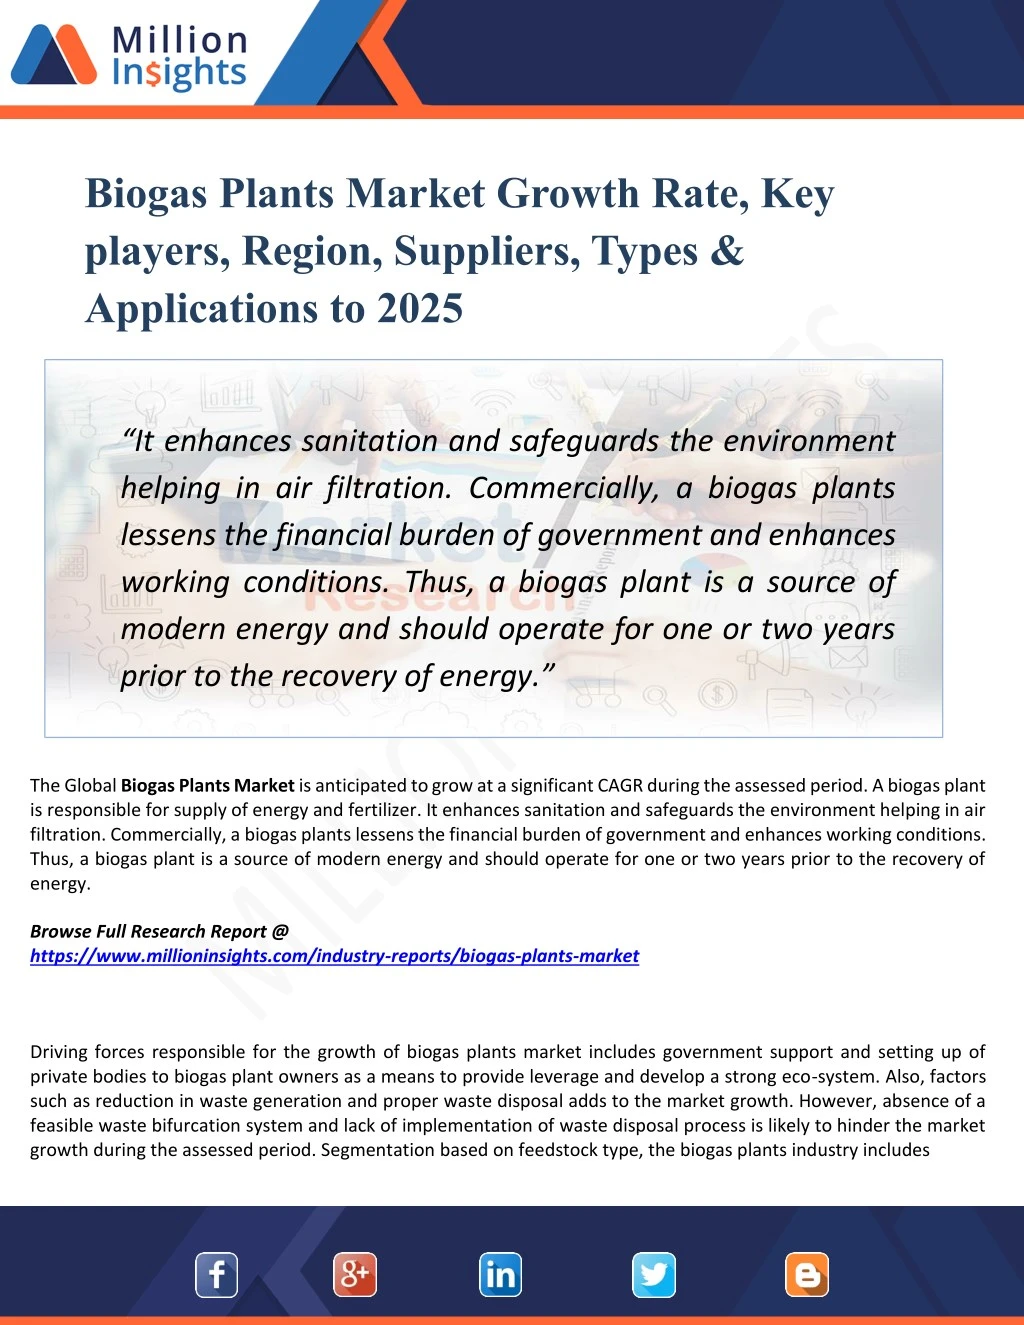 biogas plants market growth rate key players